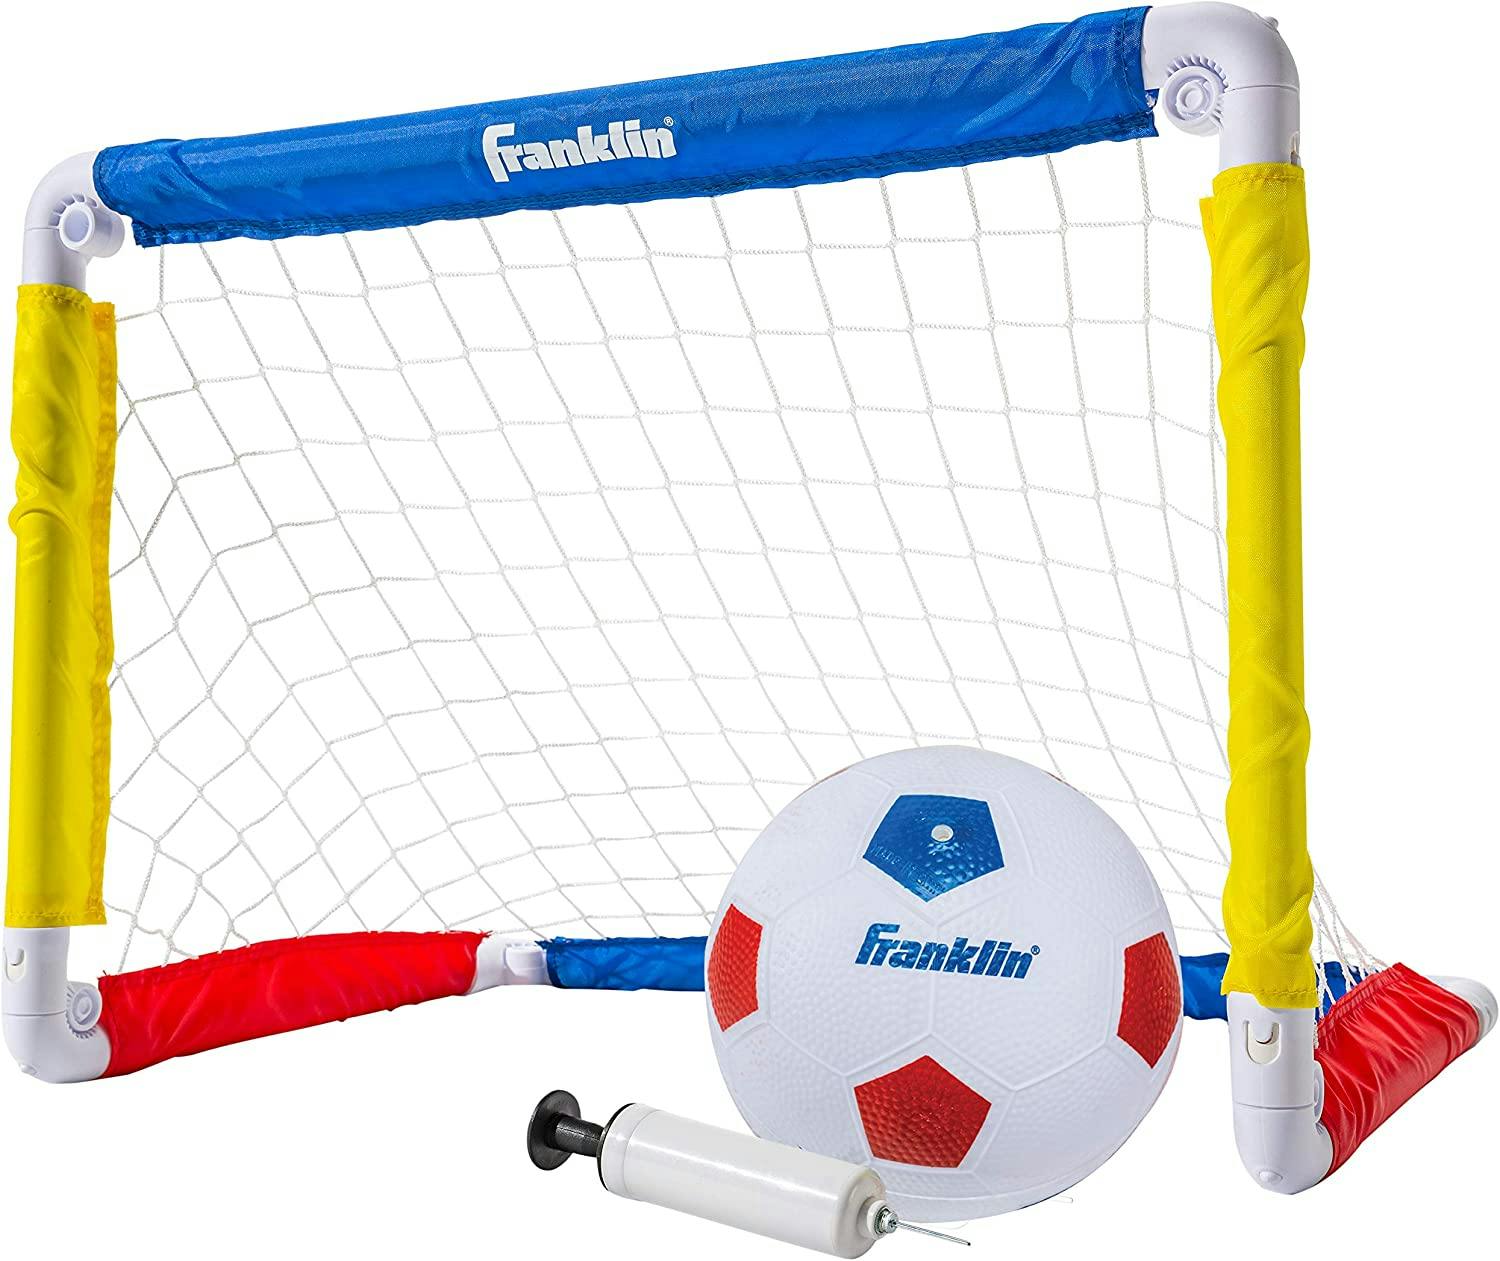 Soccer set for kids holiday gifts.